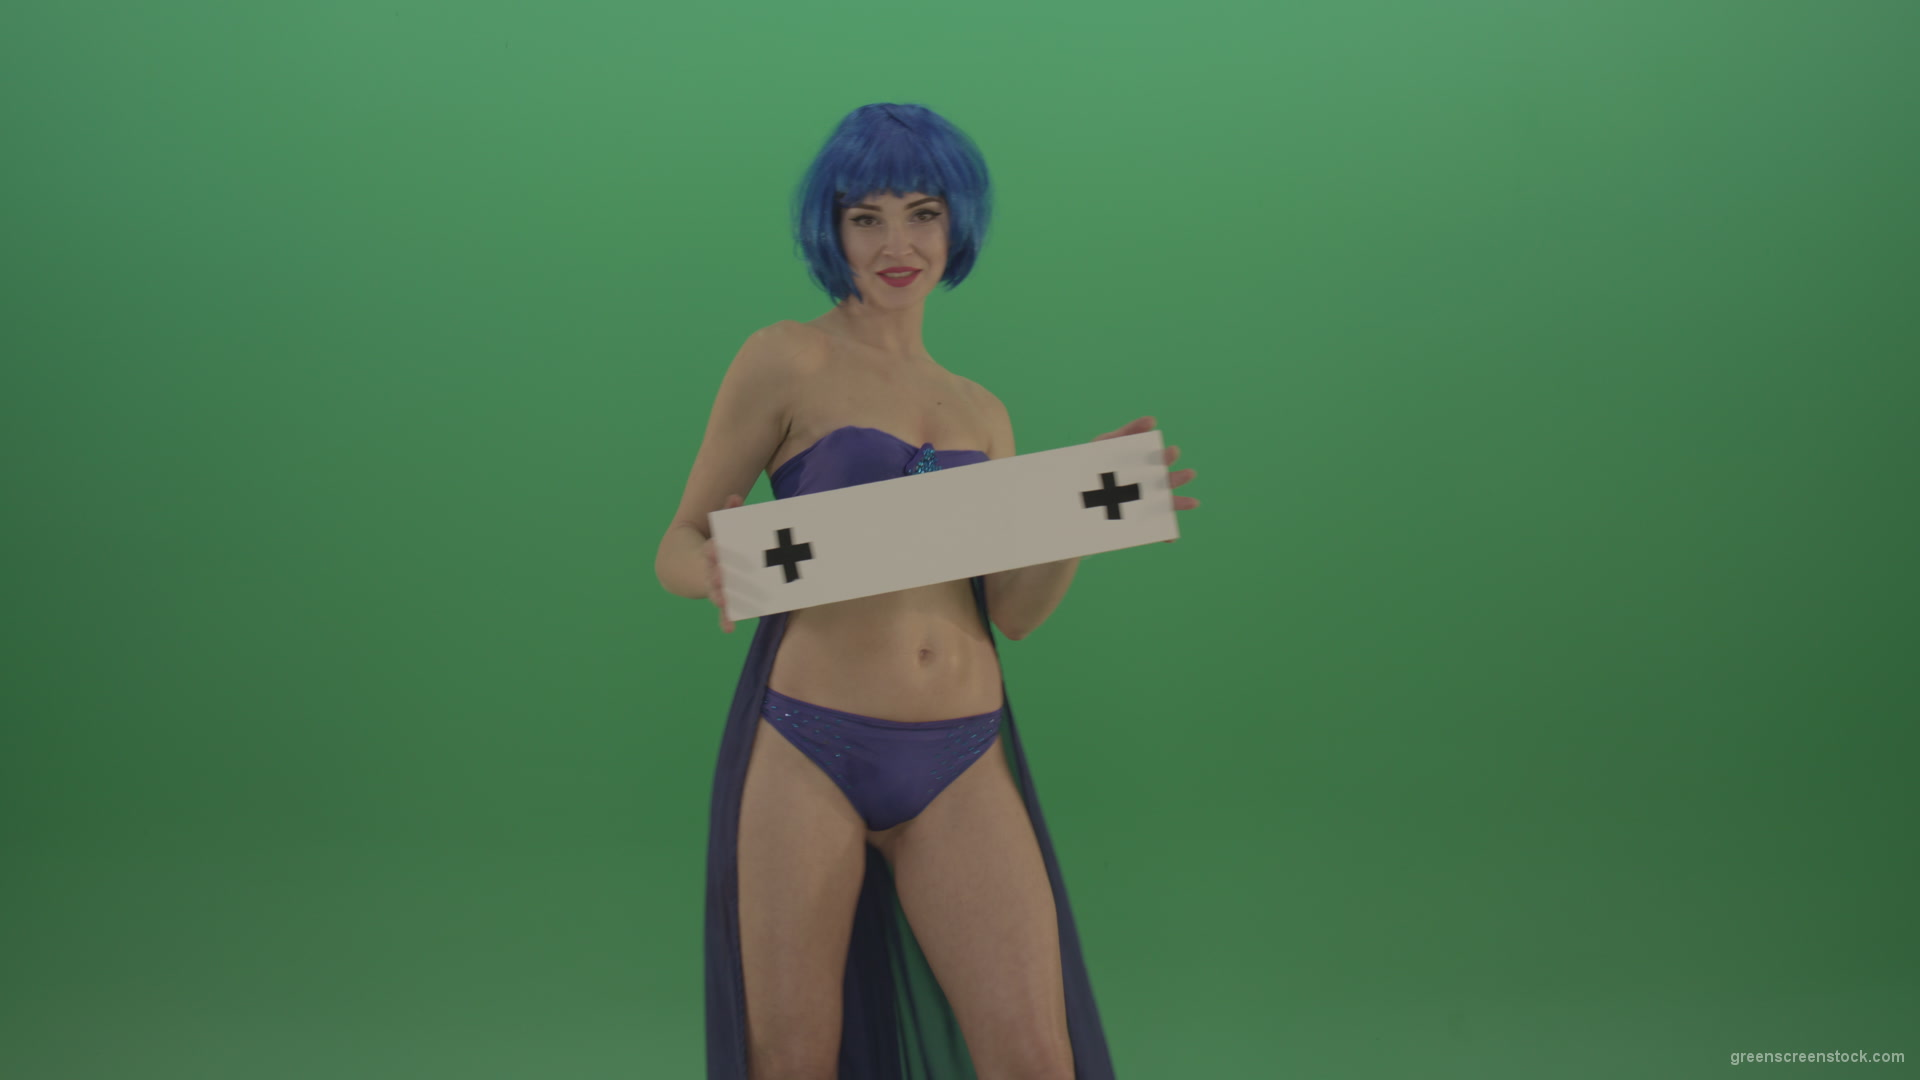 Blue-hair-elegant-naked-girl-posing-with-text-mockup-template-plane-on-green-screen_004 Green Screen Stock